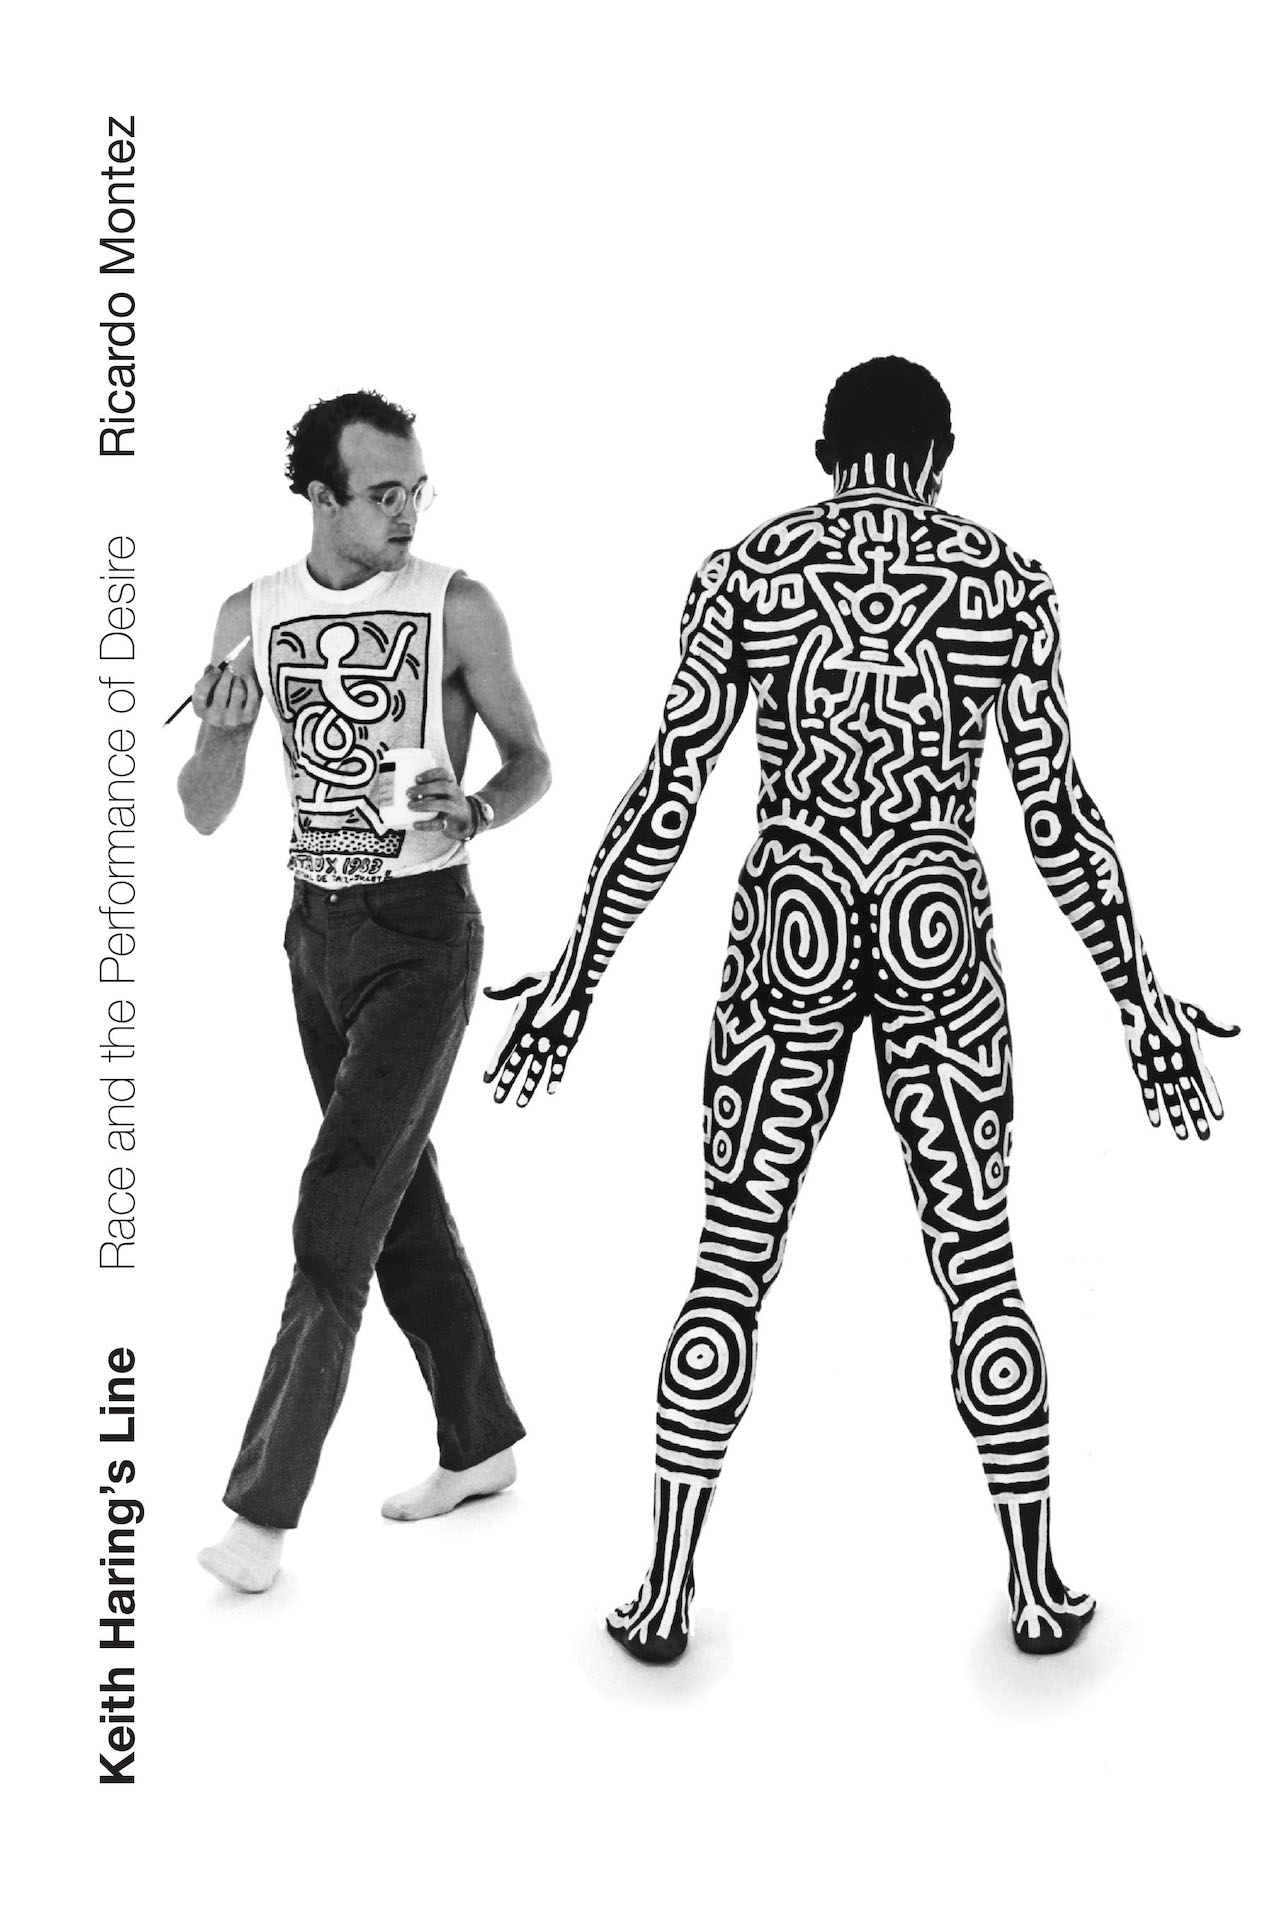 Tseng Kwong Chi Took Iconic Photos of Keith Haring and Created